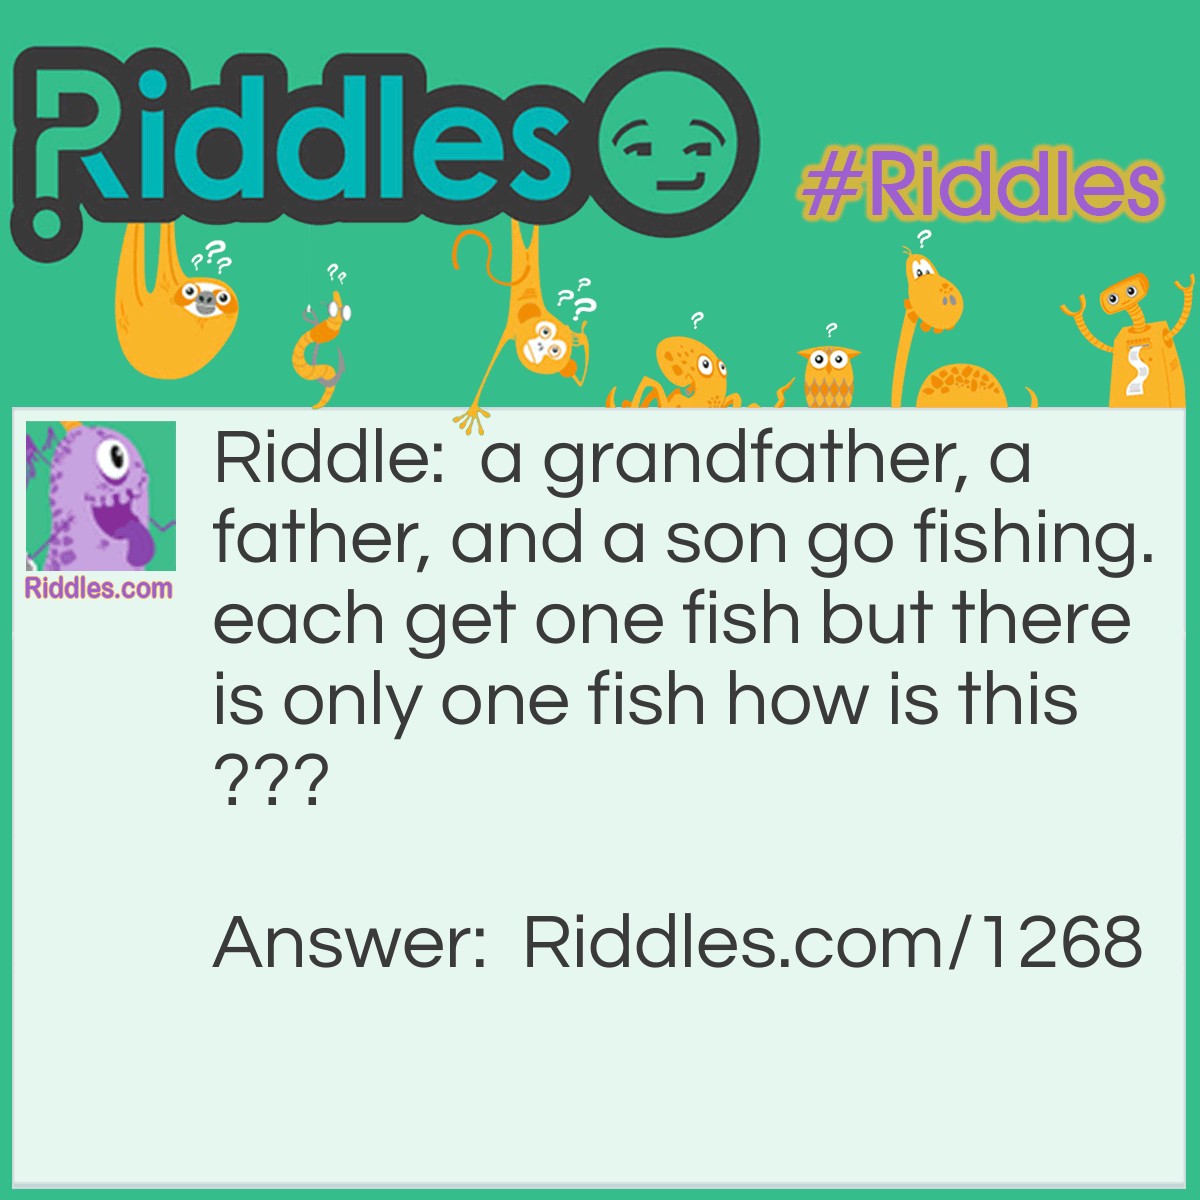 Riddle: A grandfather, a father, and a son go fishing. Each gets one fish but there is only one fish how is this? Answer: it is only one person. he is a son to his father. he is a father to his son. he is a grandfather to his grandchild.